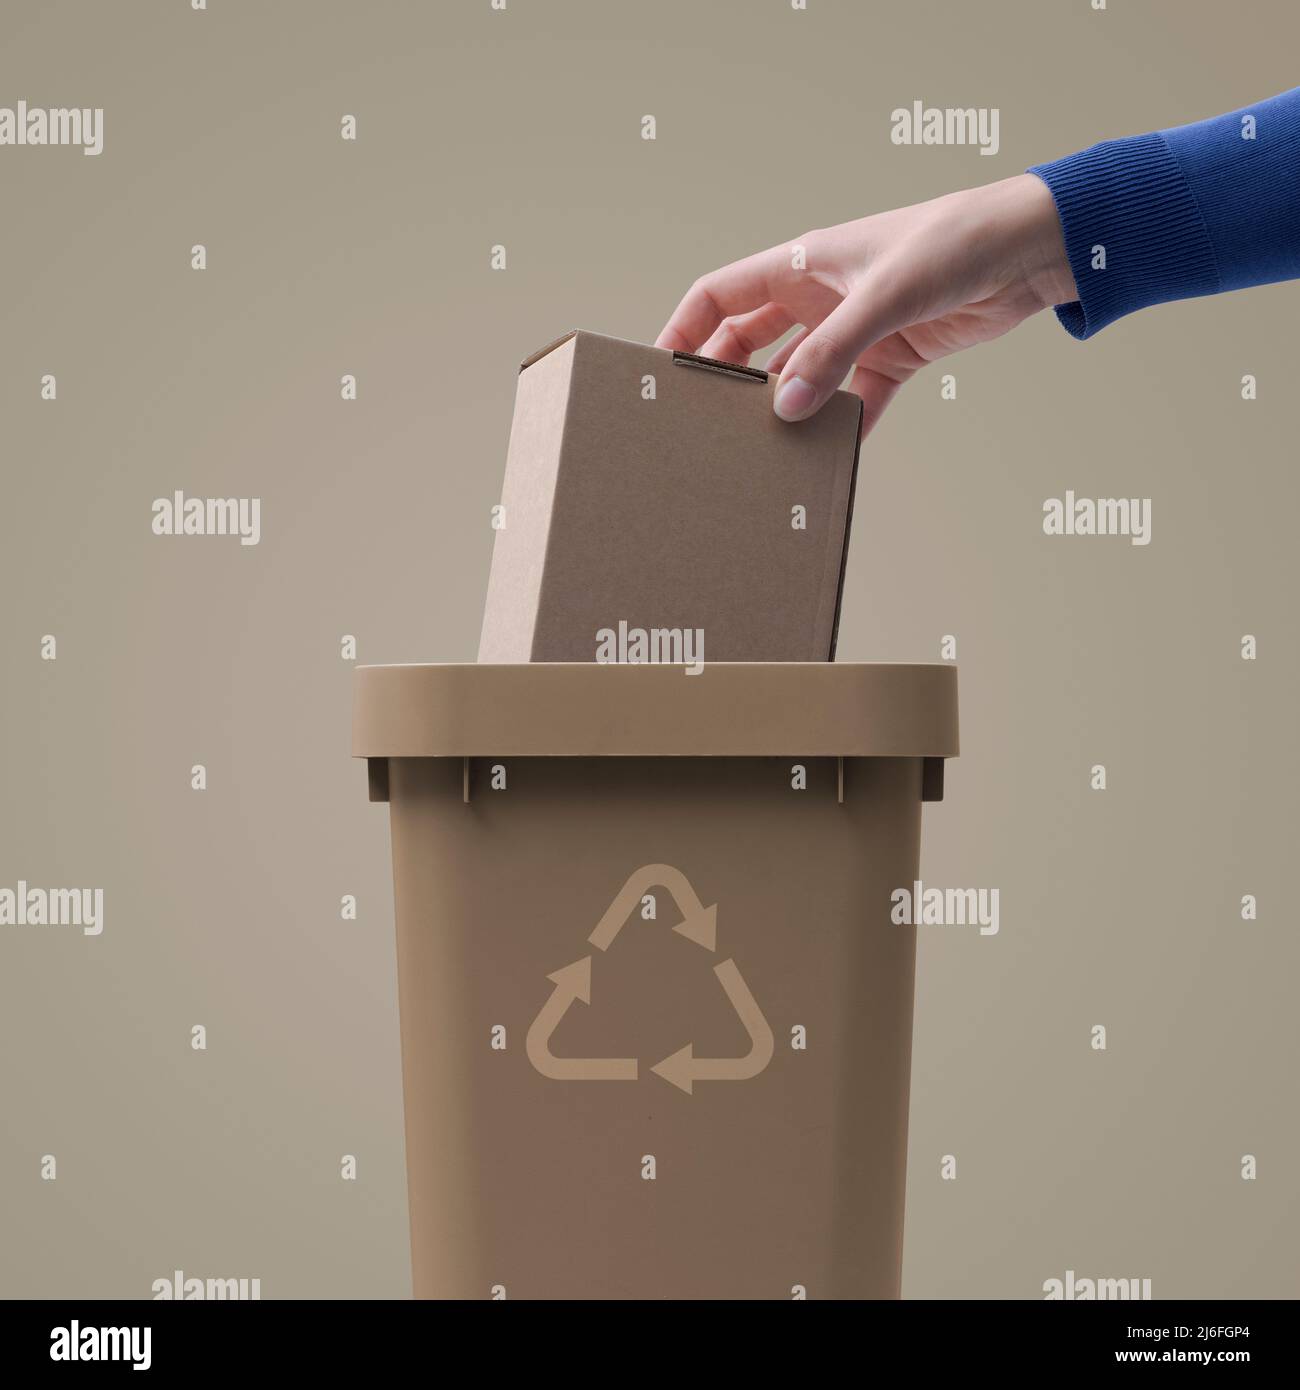 Woman putting a cardboard box package in the trash bin, separate waste collection and recycling concept Stock Photo